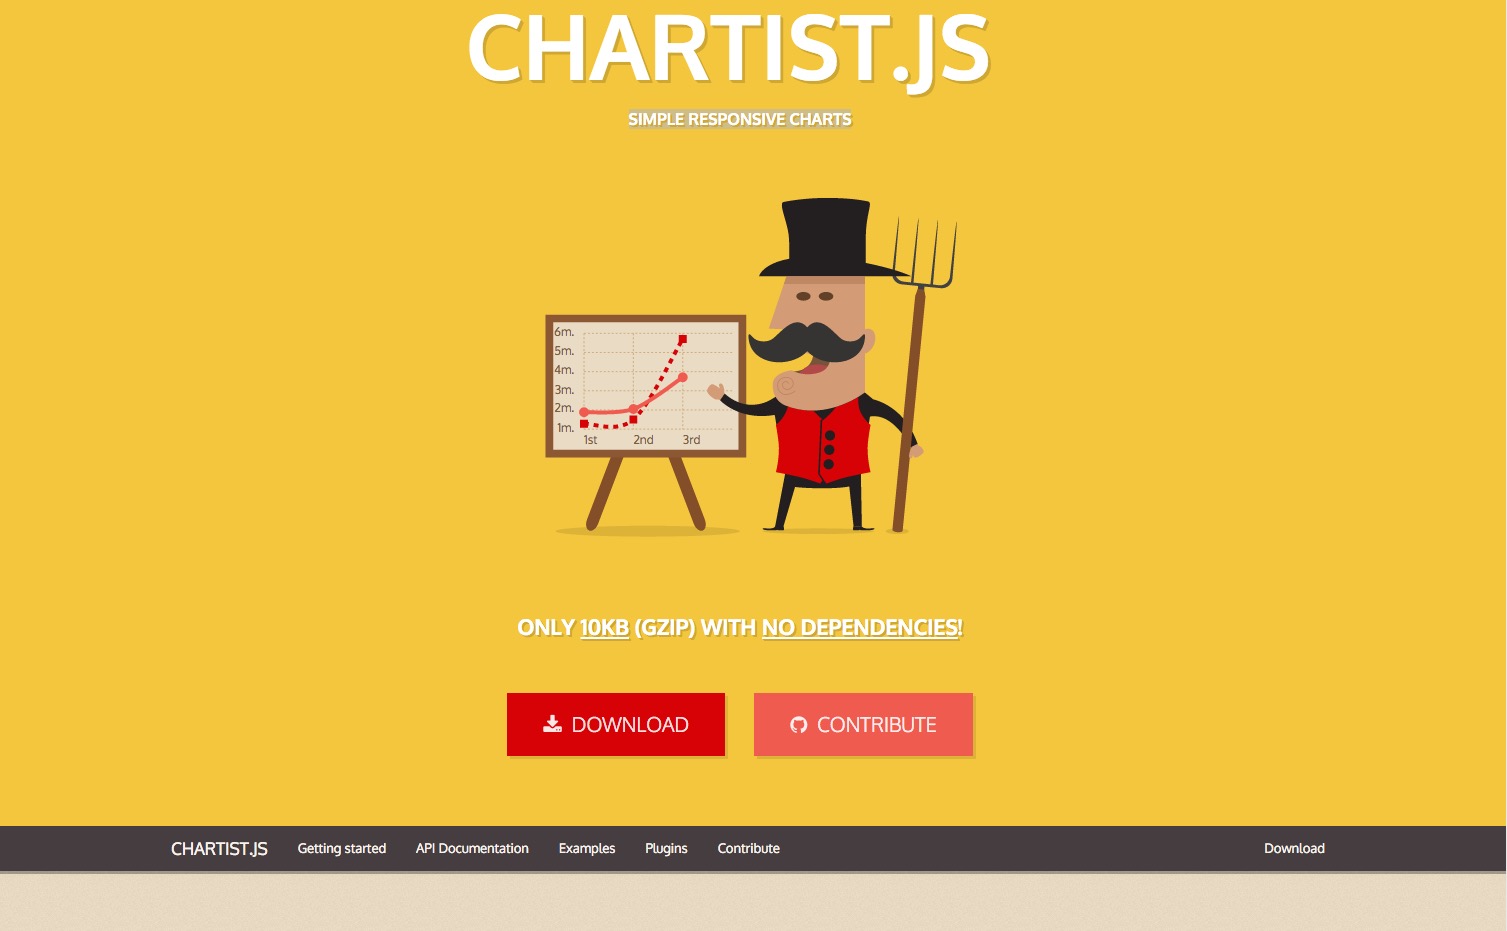 Chartist: Simple responsive charts